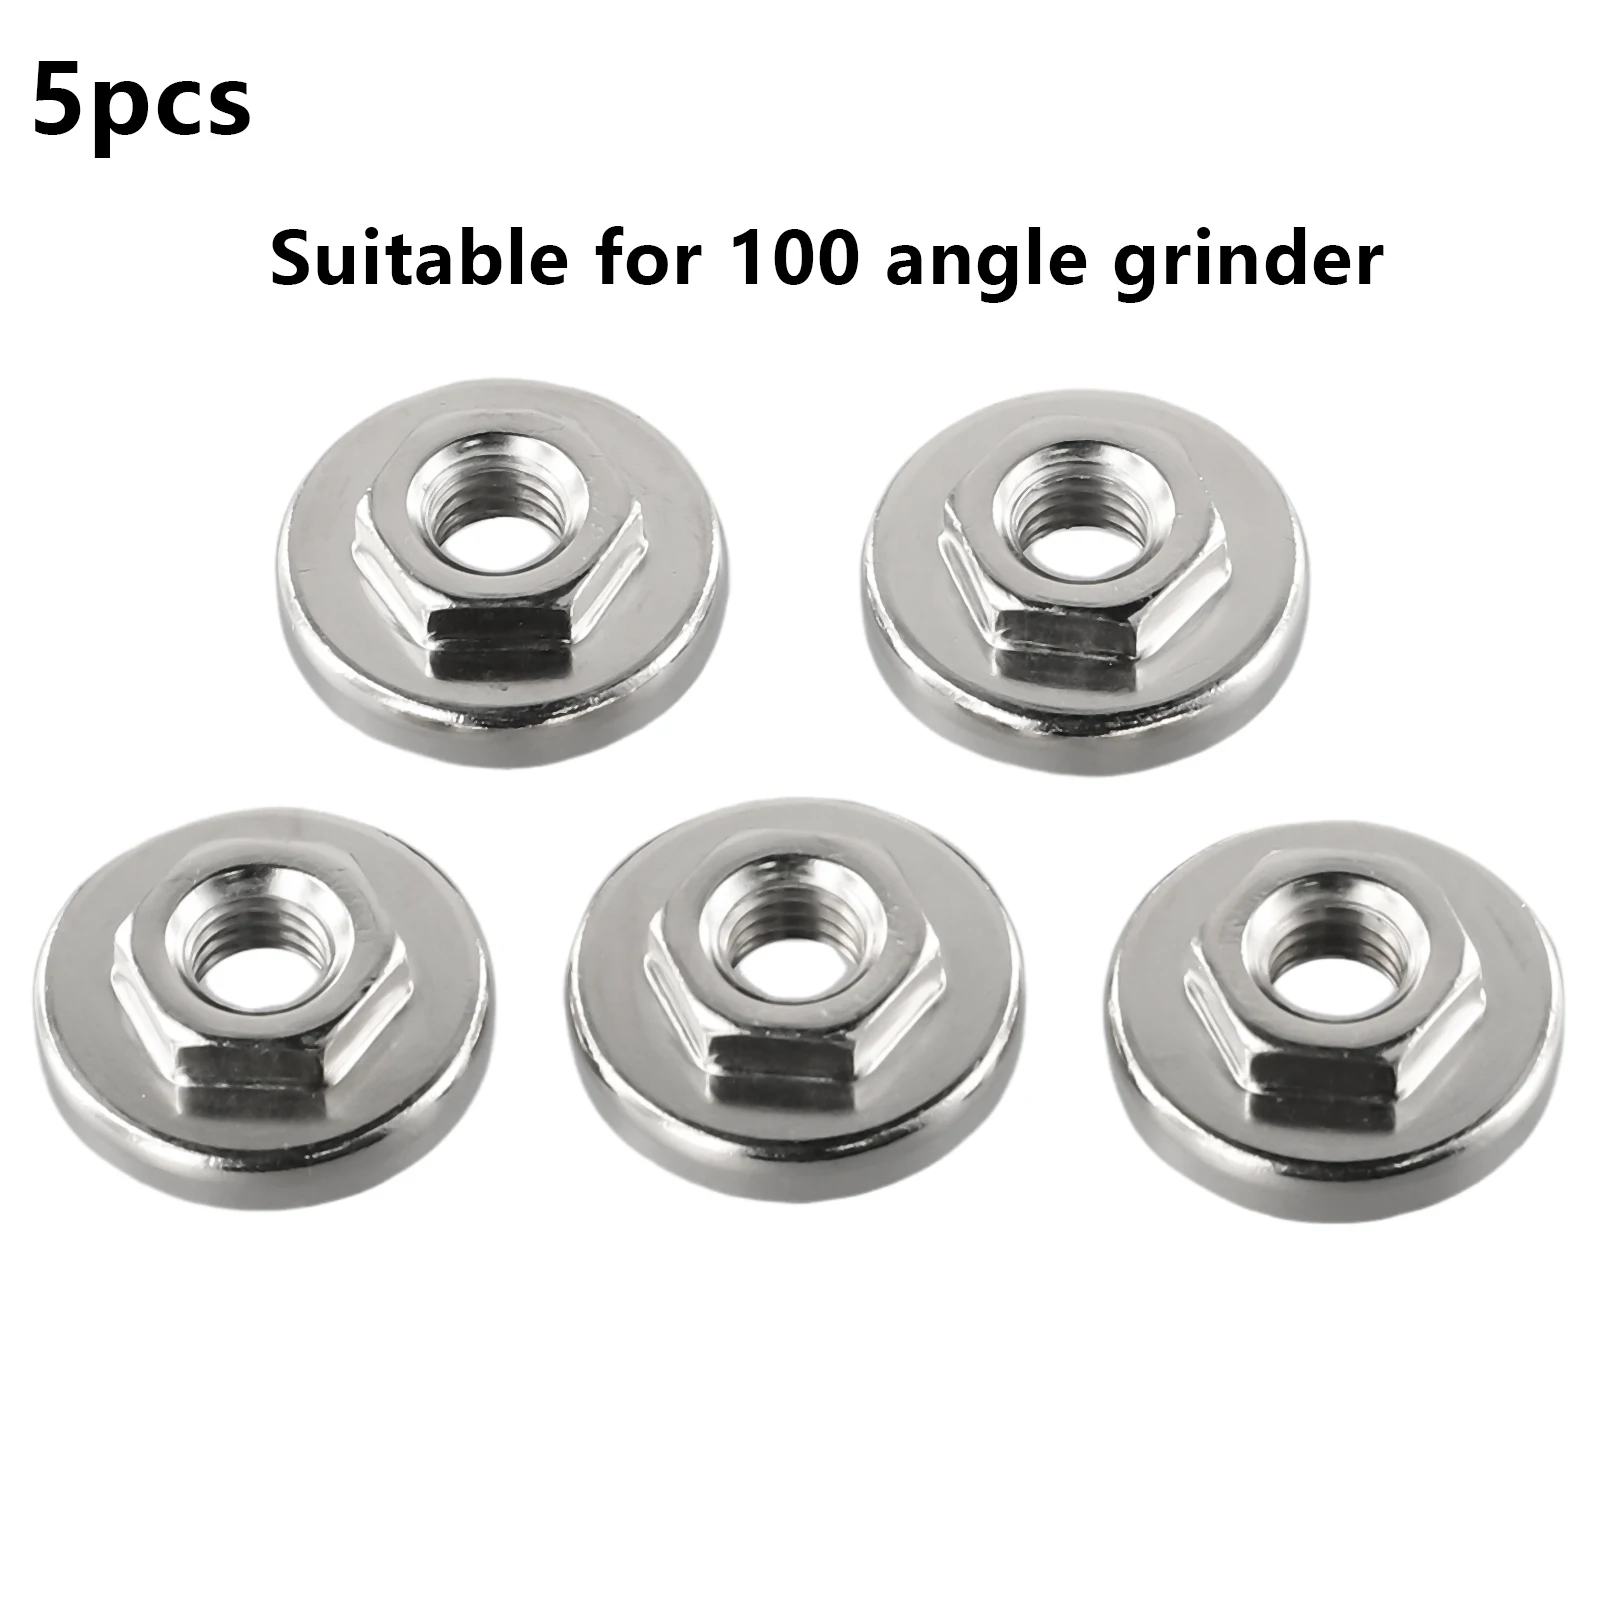 Fit For 100 Type Angle Grinder Angle Grinder Nuts 100 Type Tools Non-slip Power Tools 5pcs Silver High Quality